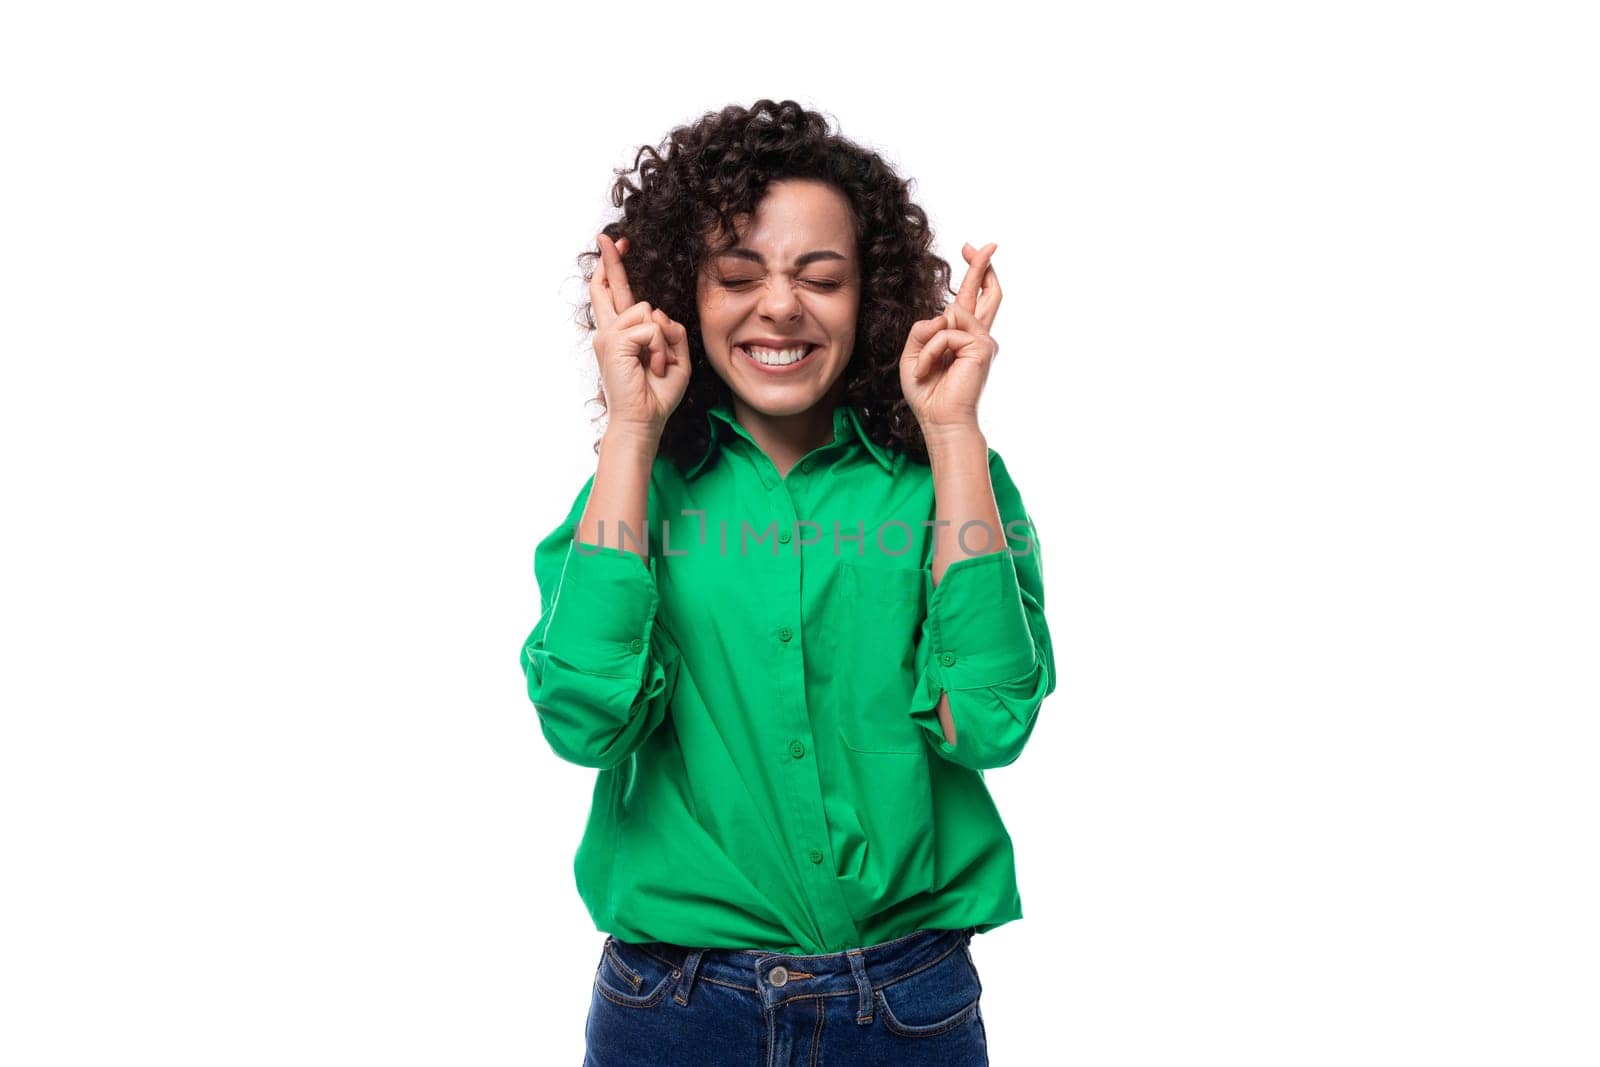 young stylish caucasian brunette woman with curled hair dressed in a green shirt crossed her fingers in anticipation.